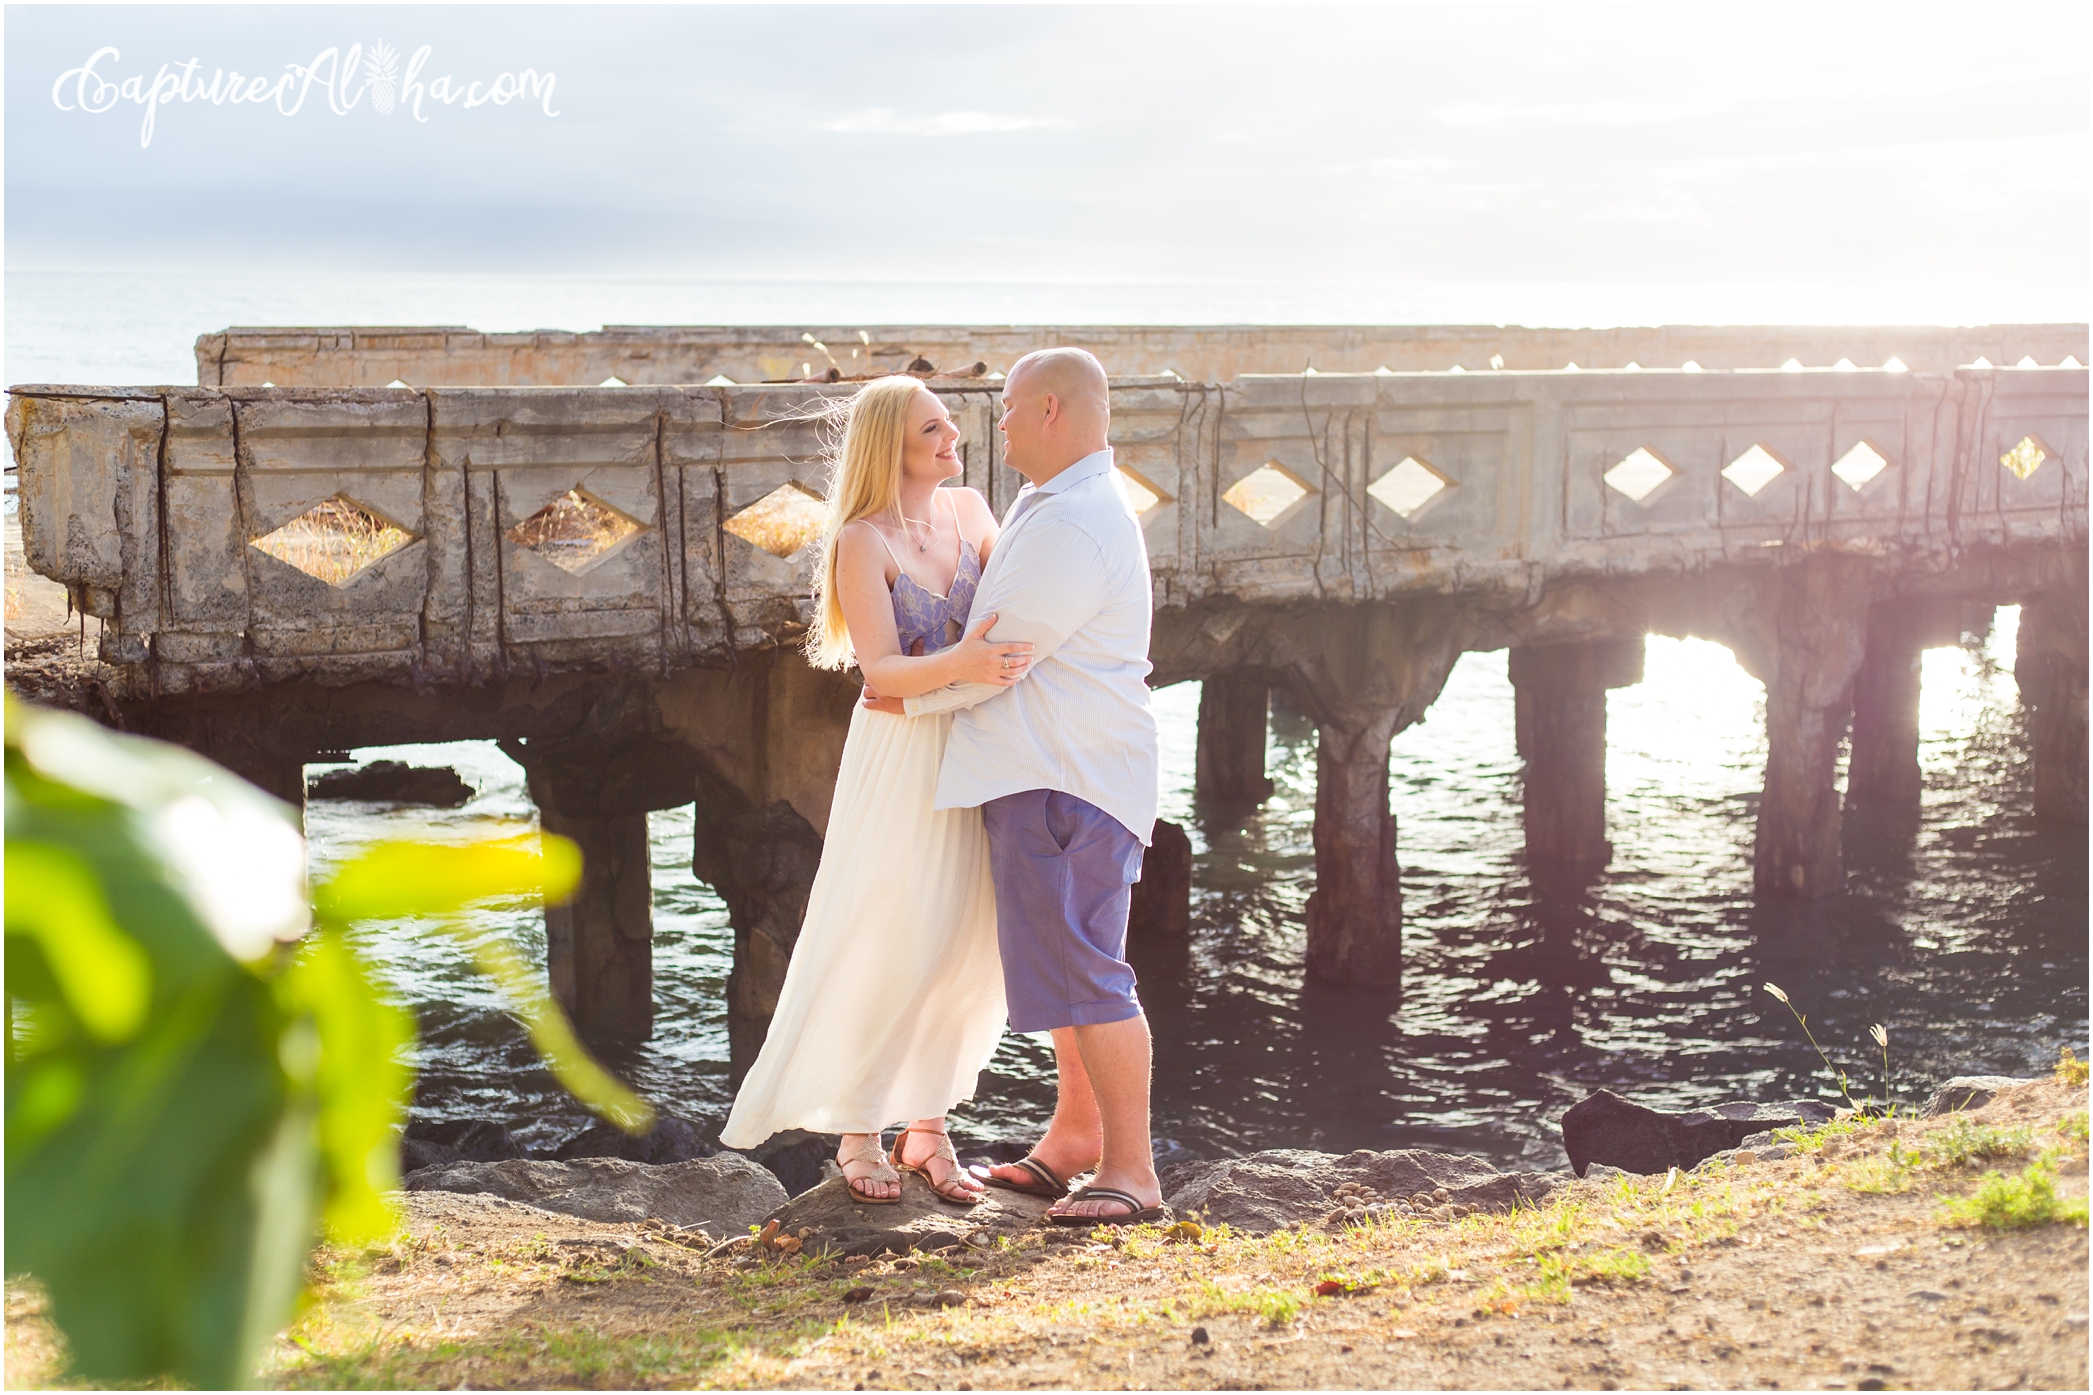 Maui Engagement Photography at Baby Beach in Sunset